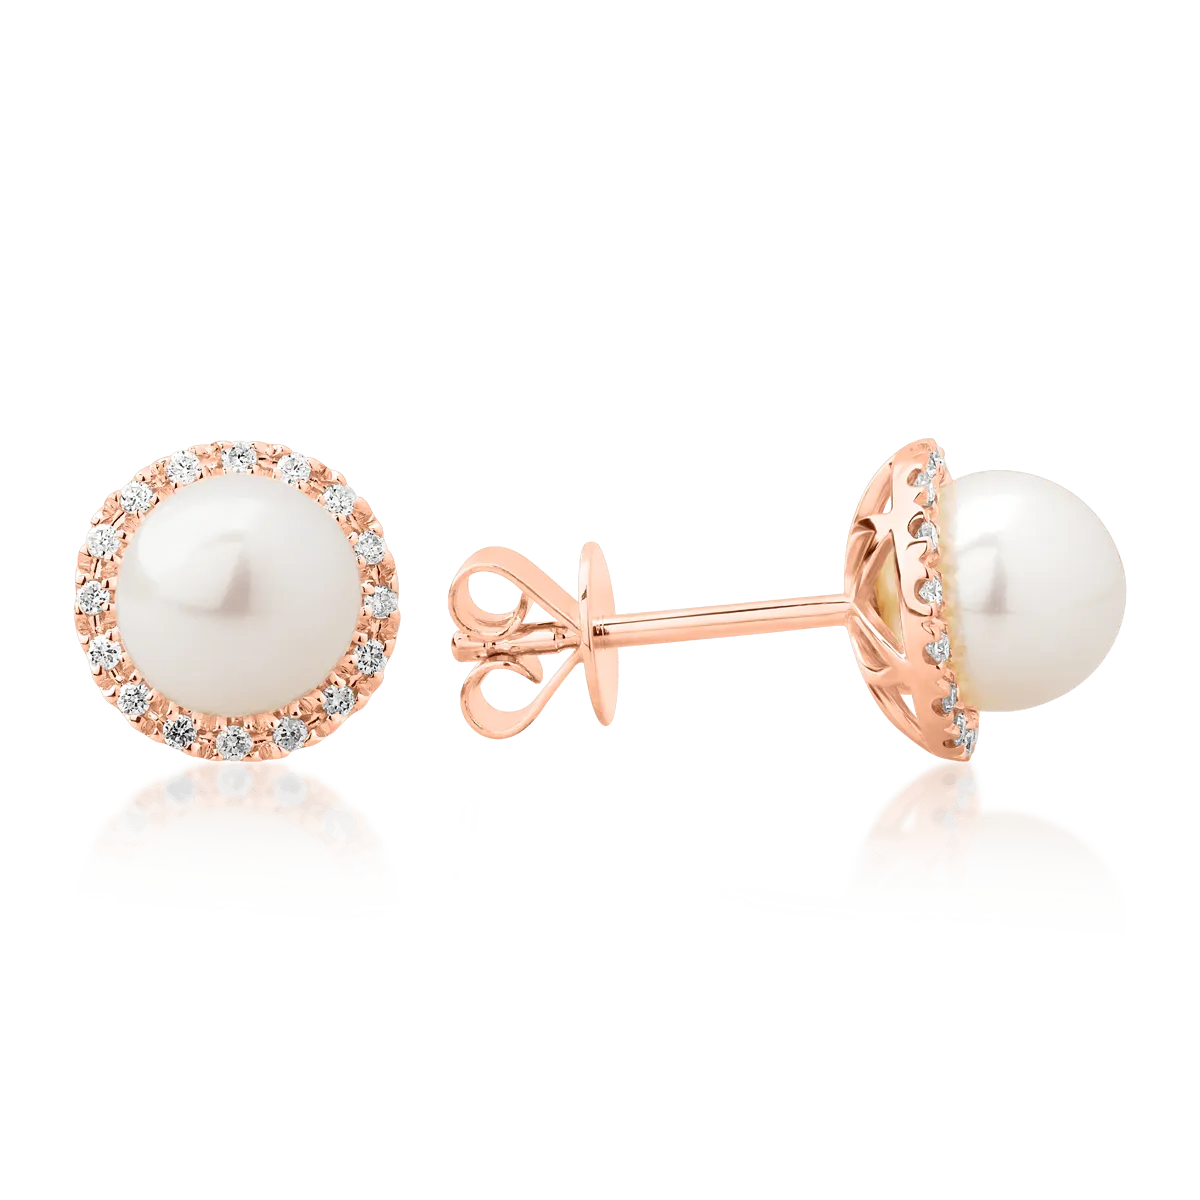 14K rose gold earrings with 2ct fresh water pearls and 0.11ct diamonds